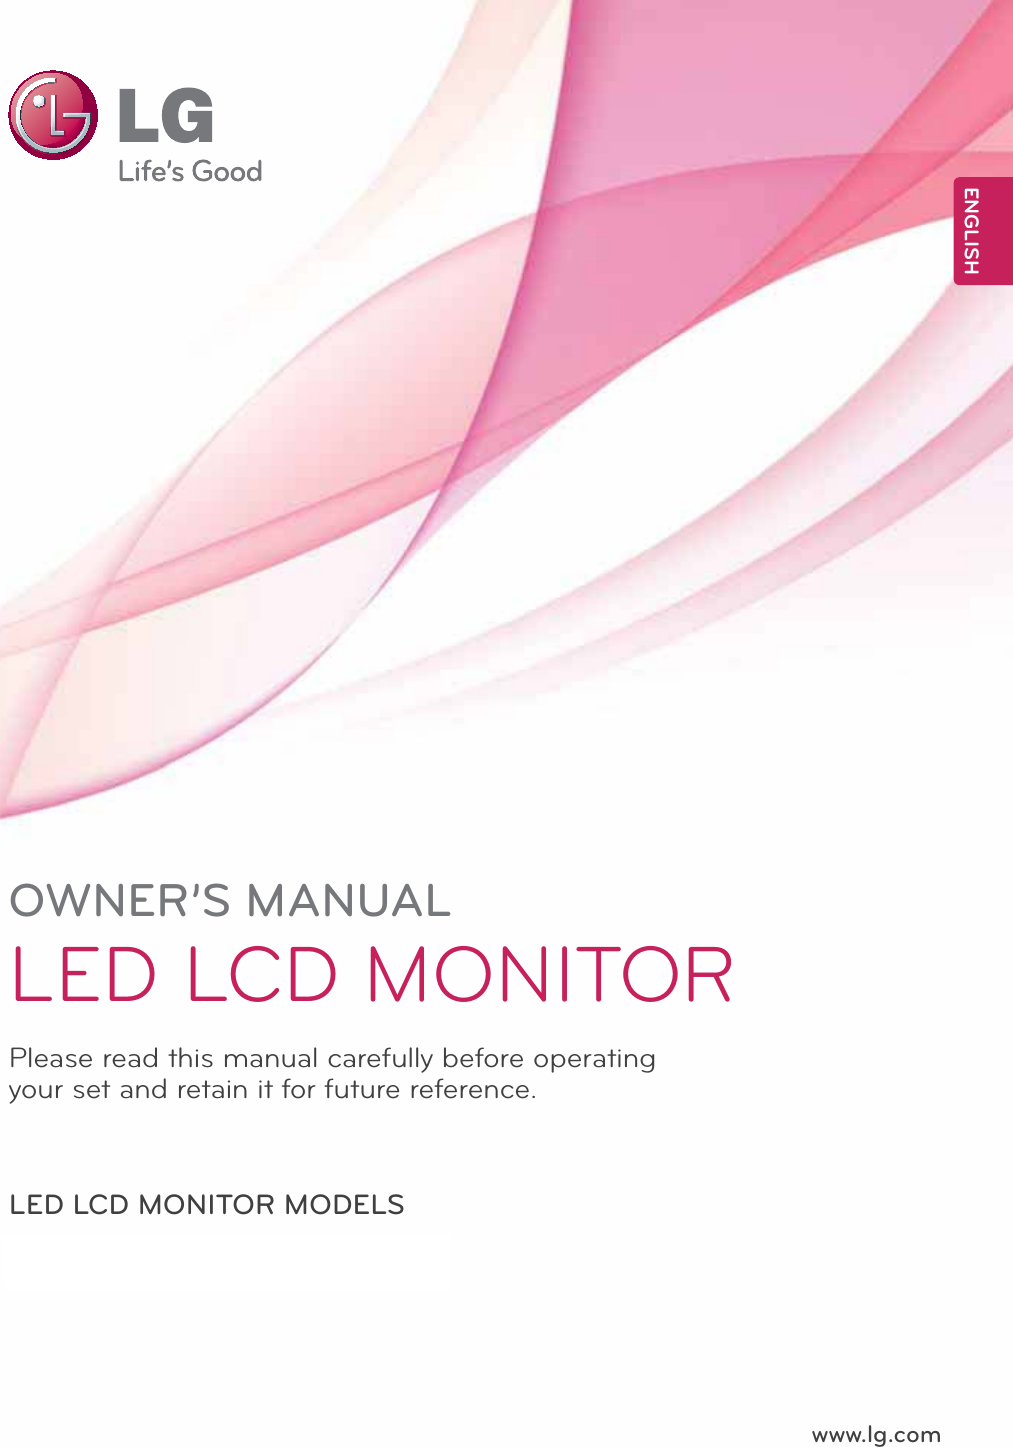 www.lg.comOWNER’S MANUALLED LCD MONITORPlease read this manual carefully before operating your set and retain it for future reference.LED LCD MONITOR MODELSENGLISHE2251T E2251S E2251VR